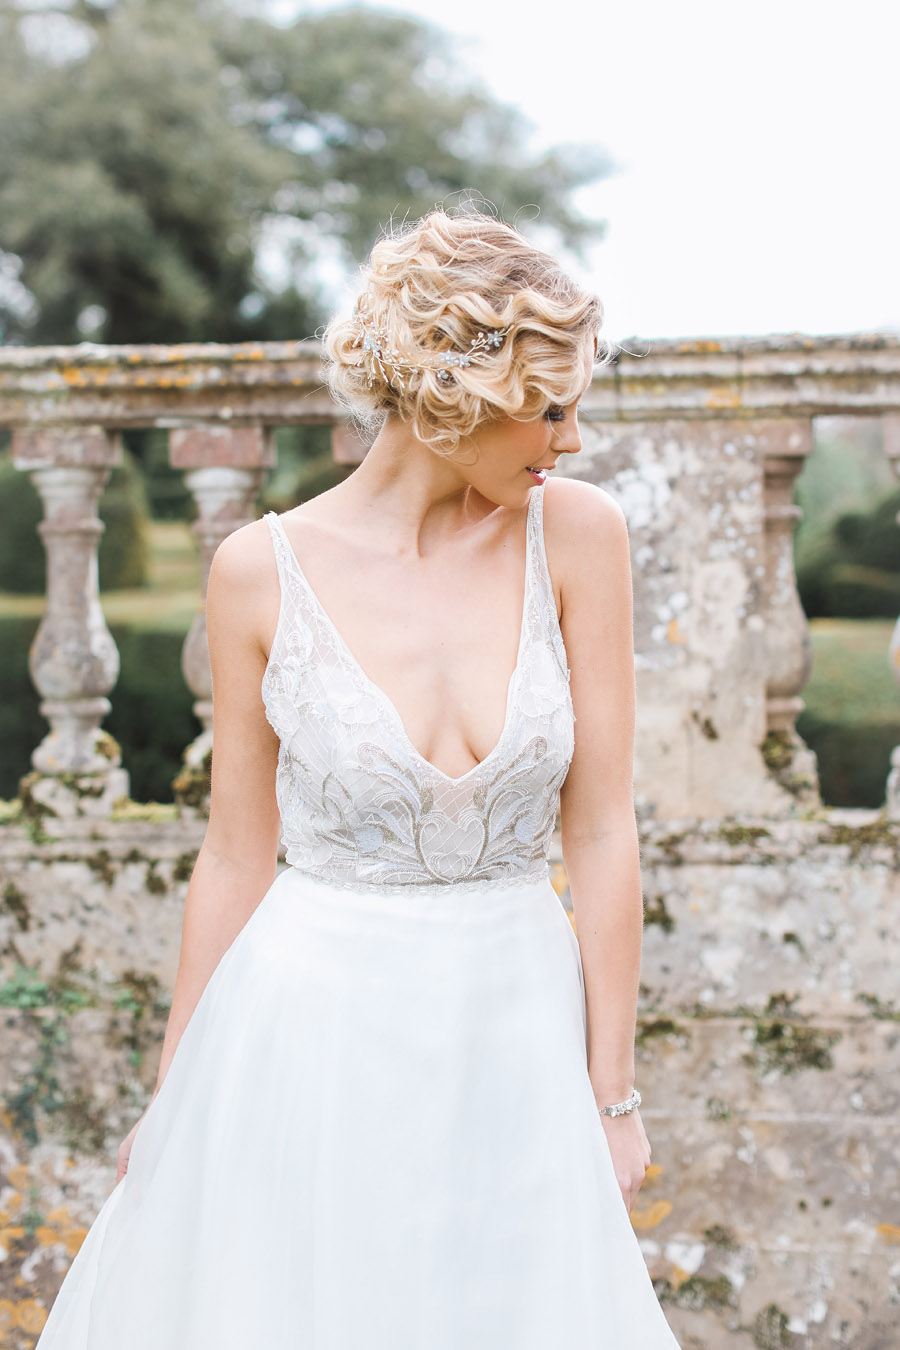 Romantic wedding ideas from Hale Park, photo by Charlotte Wise Photography (11)